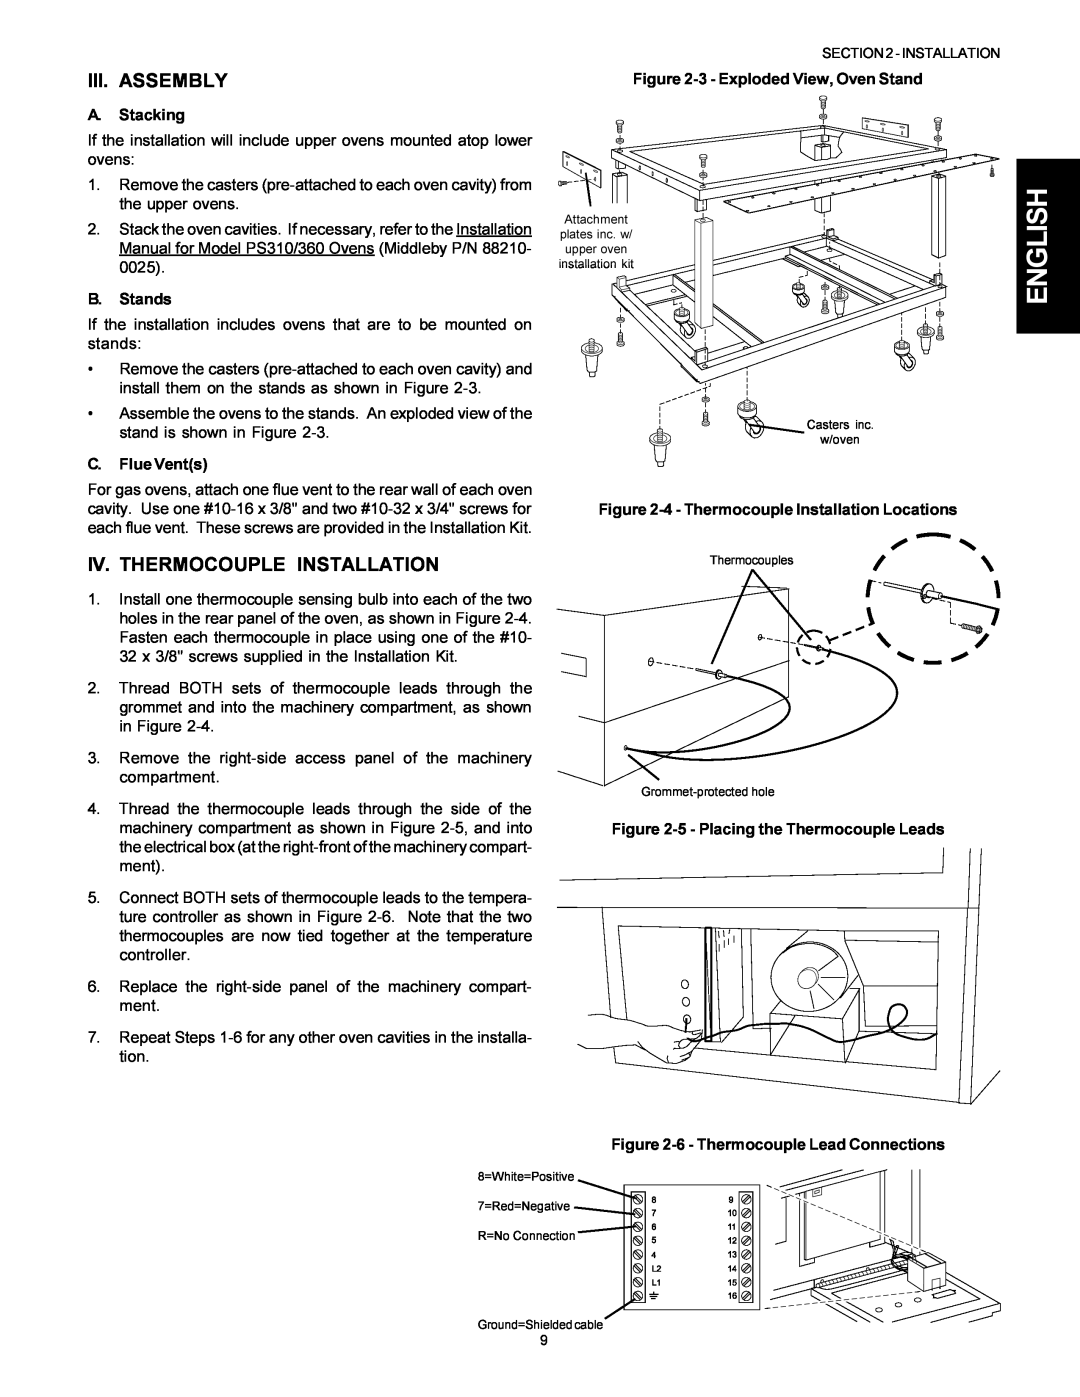 Middleby Marshall PS360S, PS360WB Iii. Assembly, Iv. Thermocouple Installation, A. Stacking, 3 - Exploded View, Oven Stand 